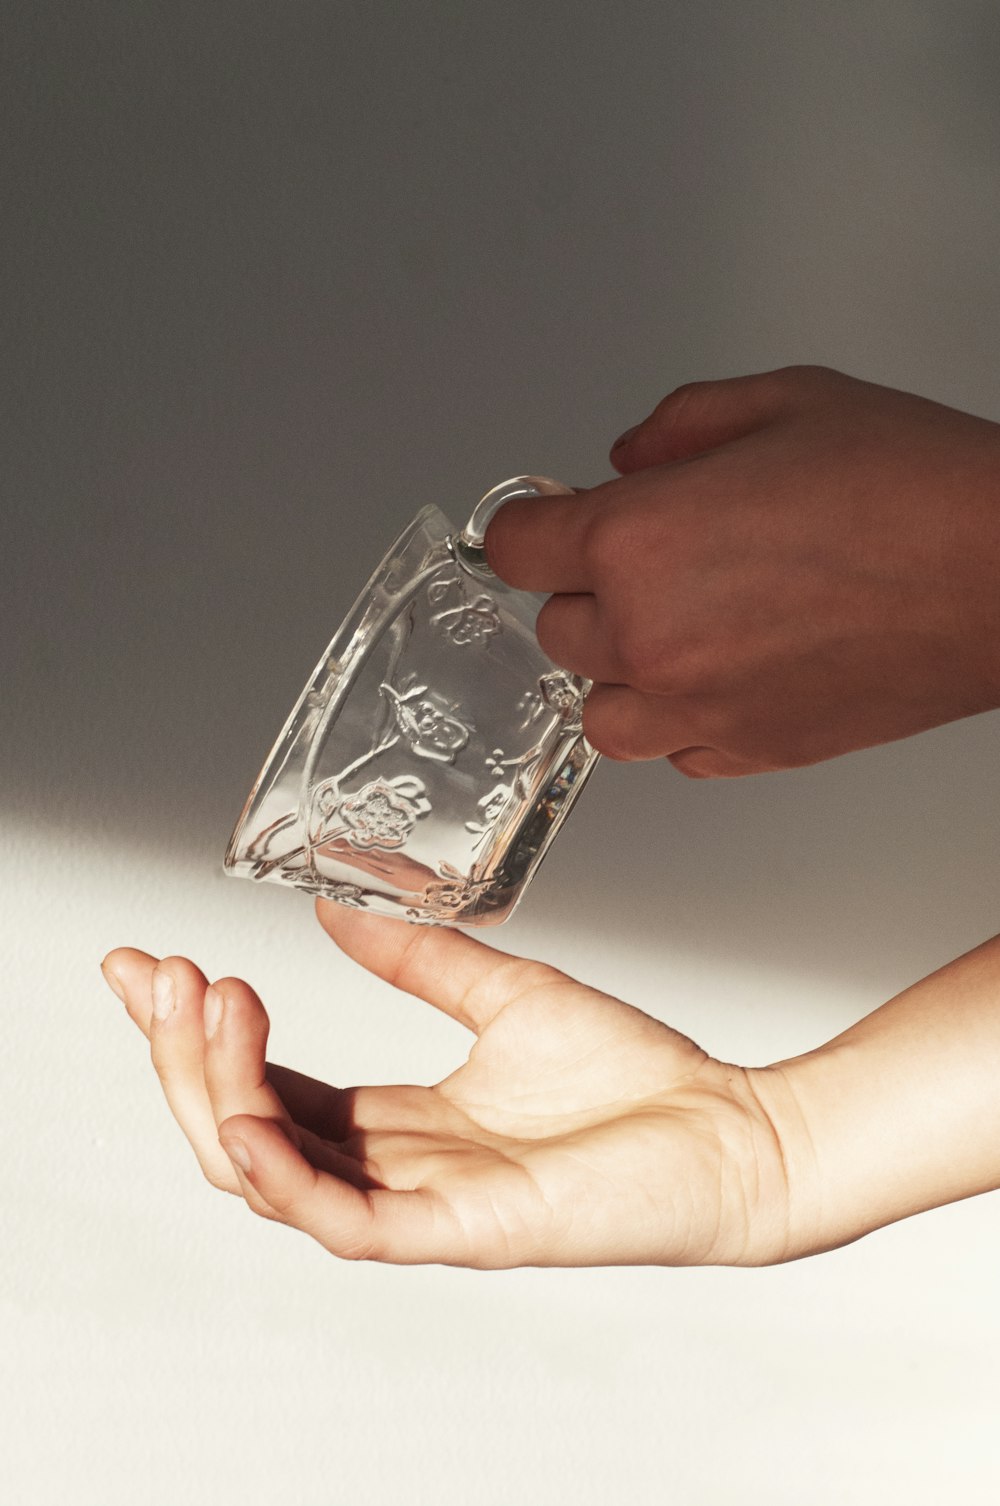 person holding clear glass mug